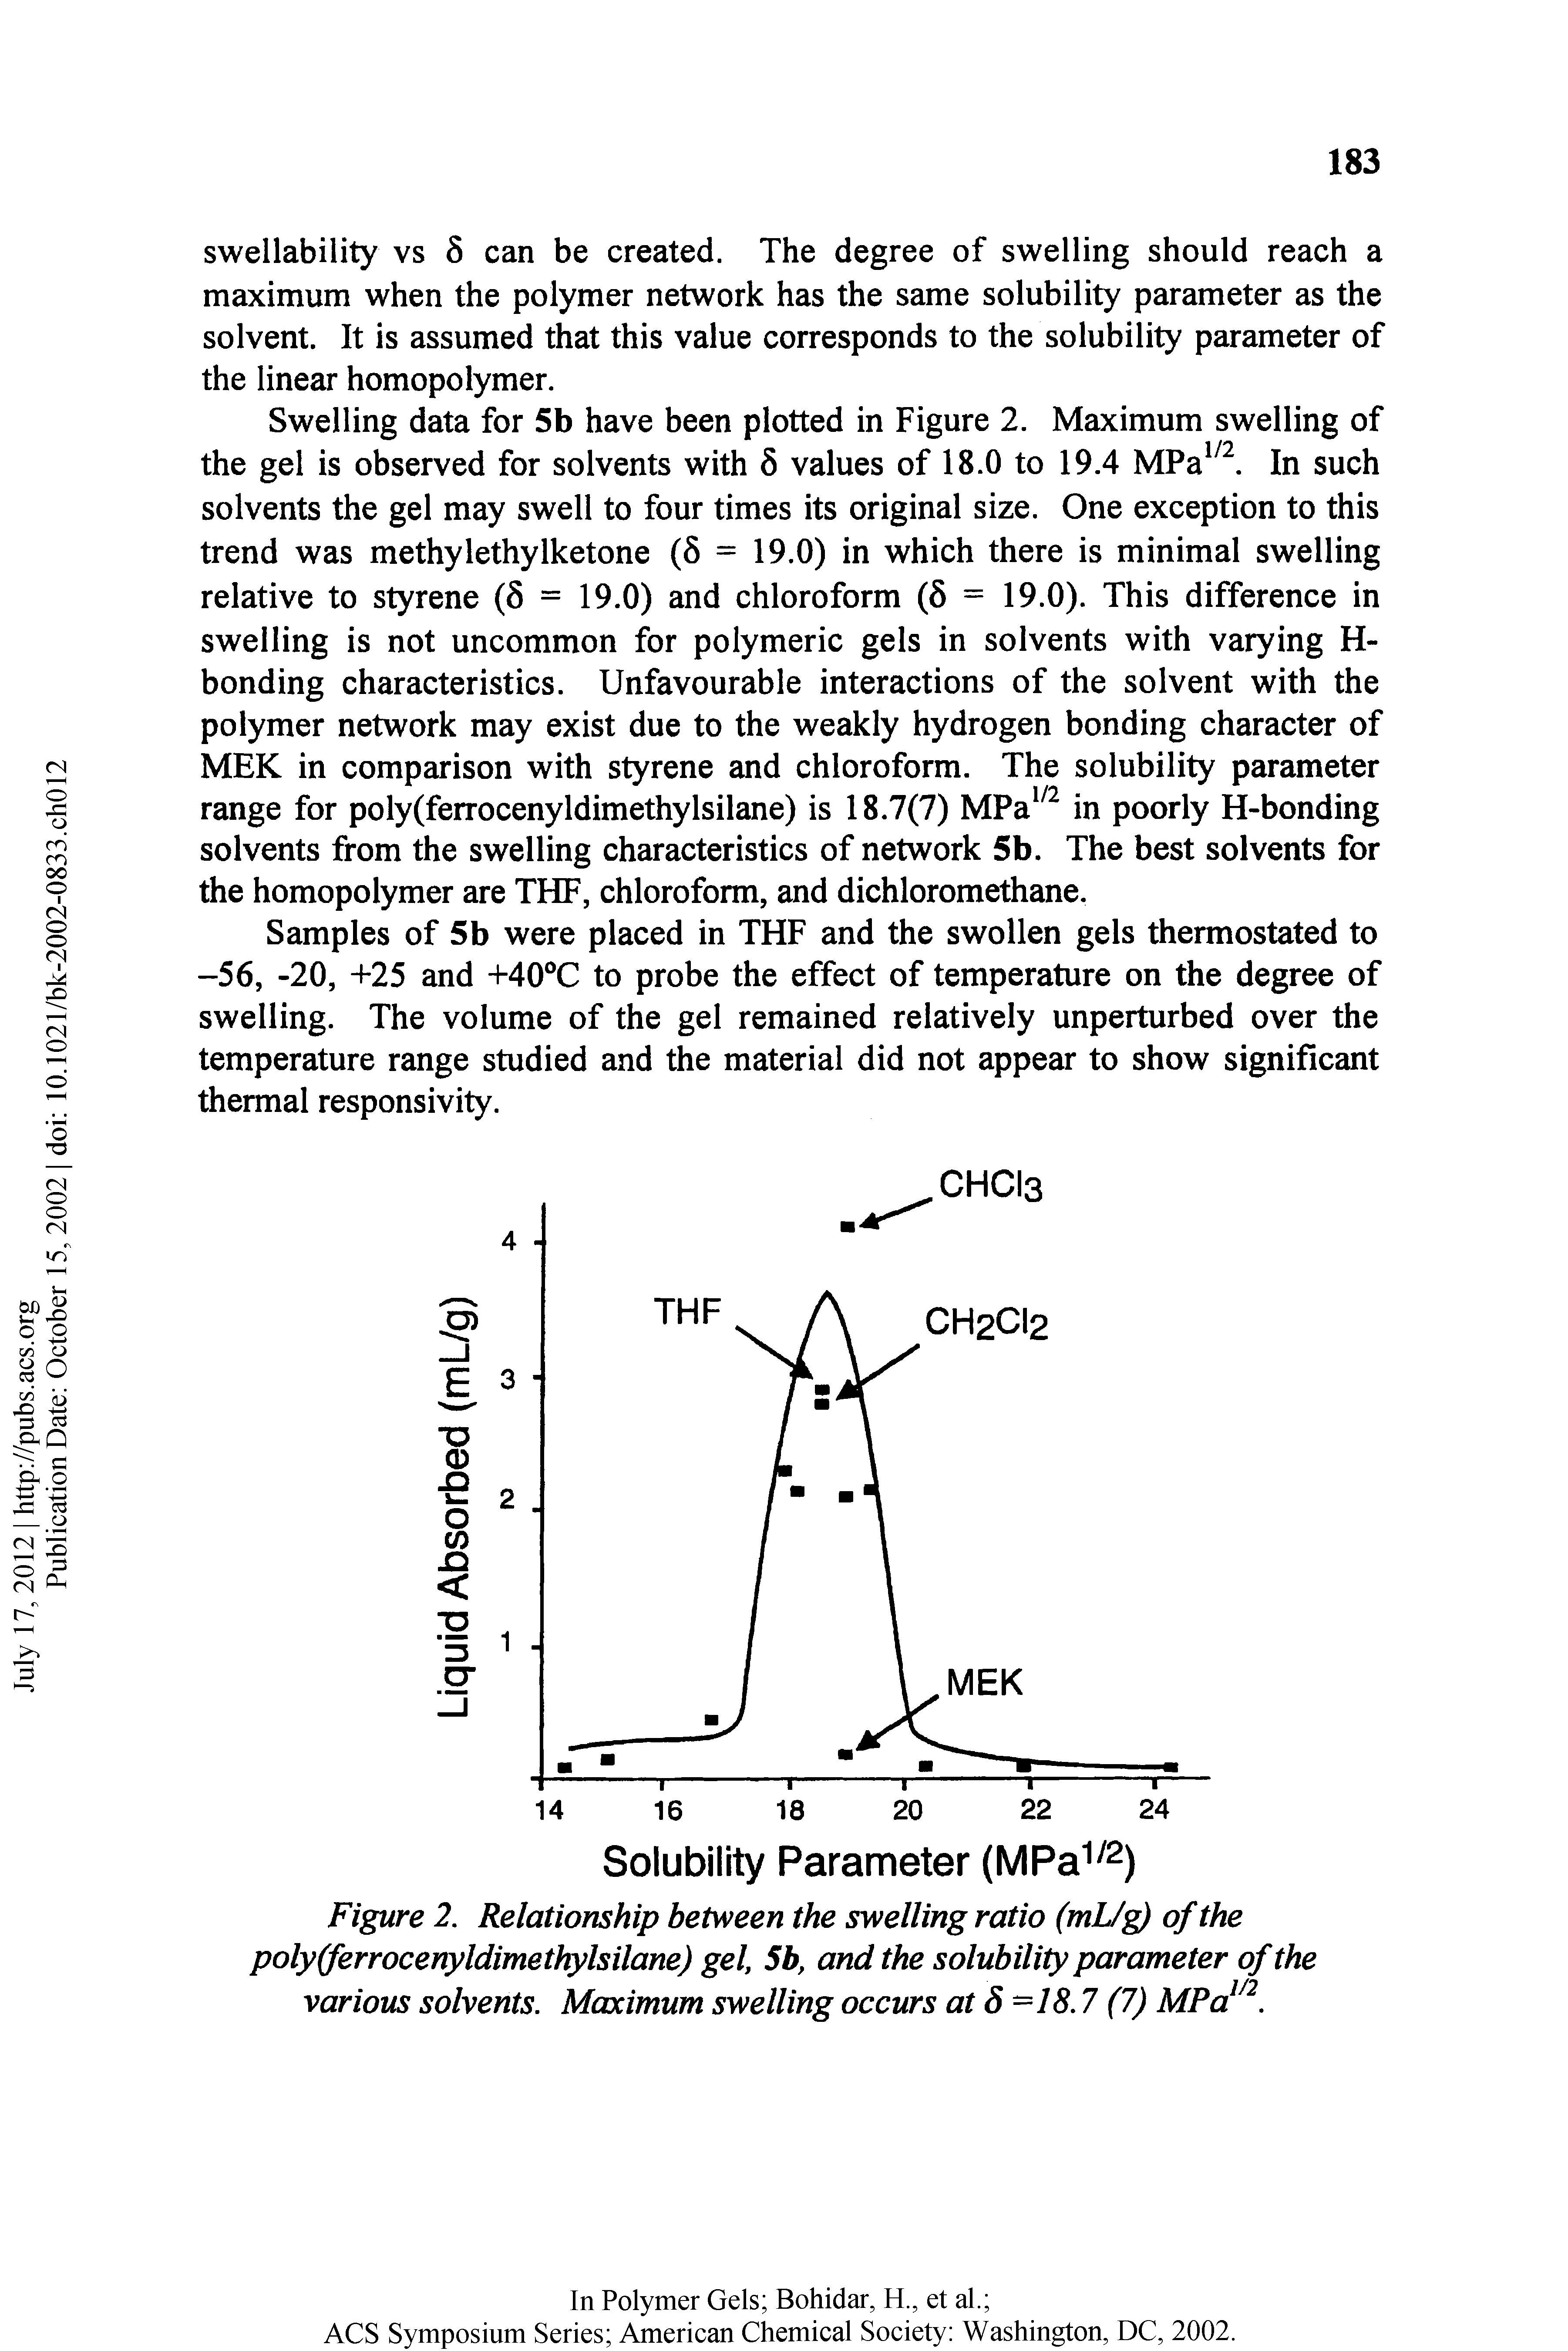 Figure 2. Relationship between the swelling ratio (mU of the poly(ferrocenyldimethylsilane) gel 5b, and the solubility parameter of the various solvents. Maximum swelling occurs at 5 -18.7 (7) MPa . ...